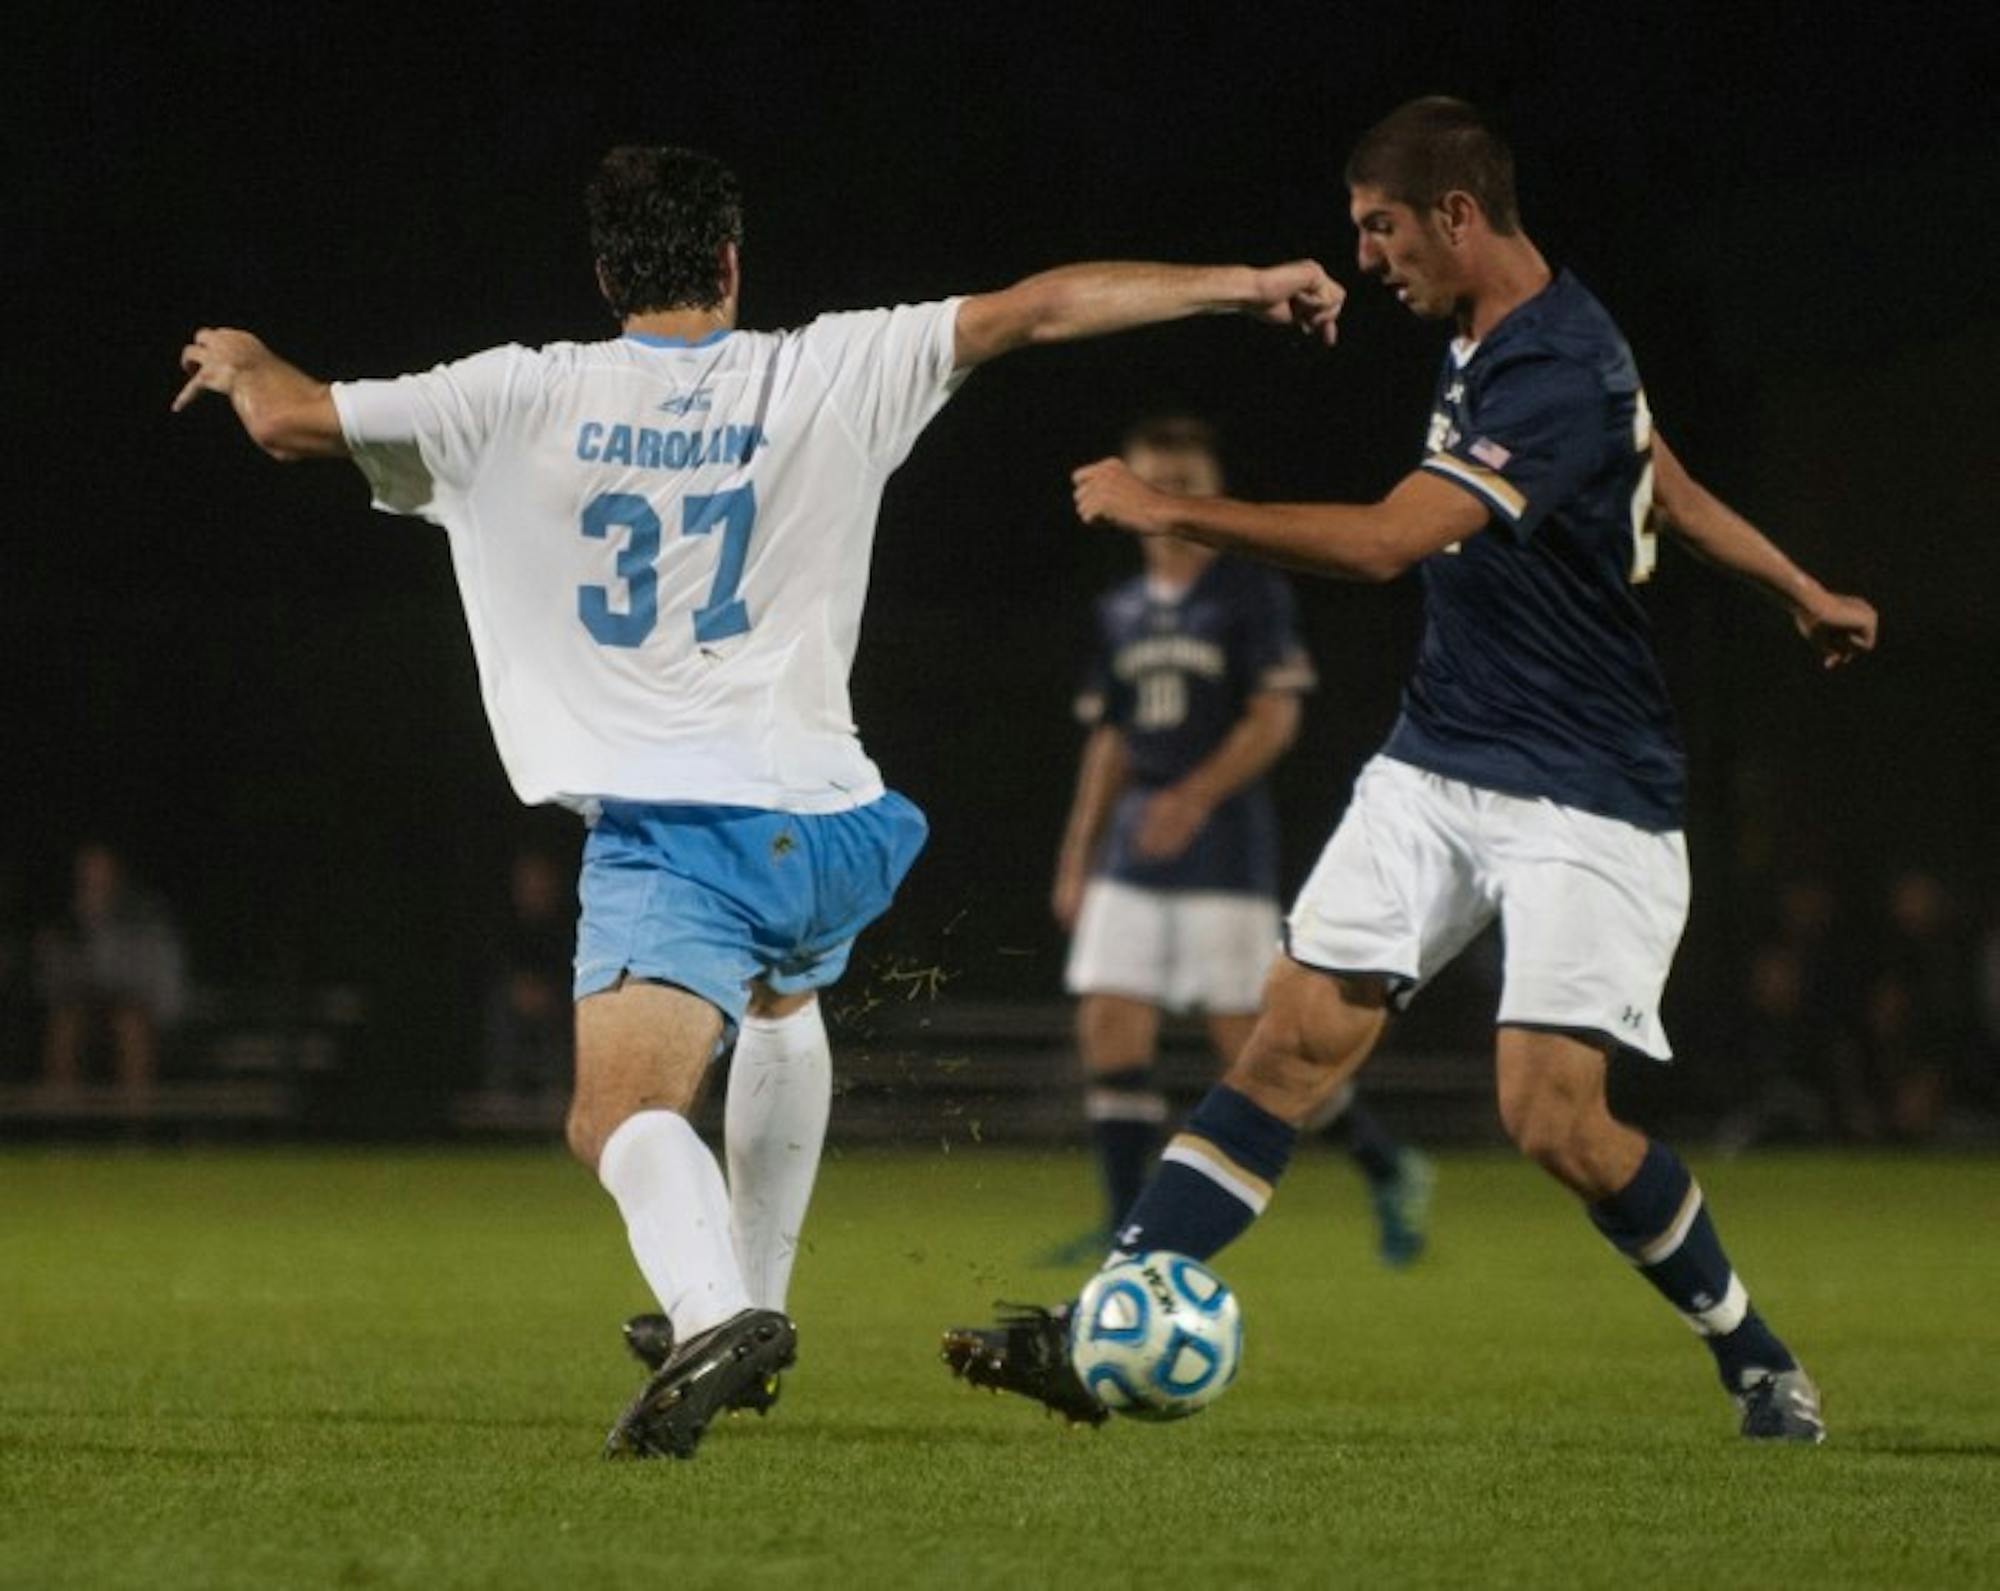 Irish freshman forward Jeffery Farina shields the ball as a North Carolina defender attempts to take it away during Notre Dame’s 2-0 victory over the Tar Heels on Friday at Alumni Stadium.